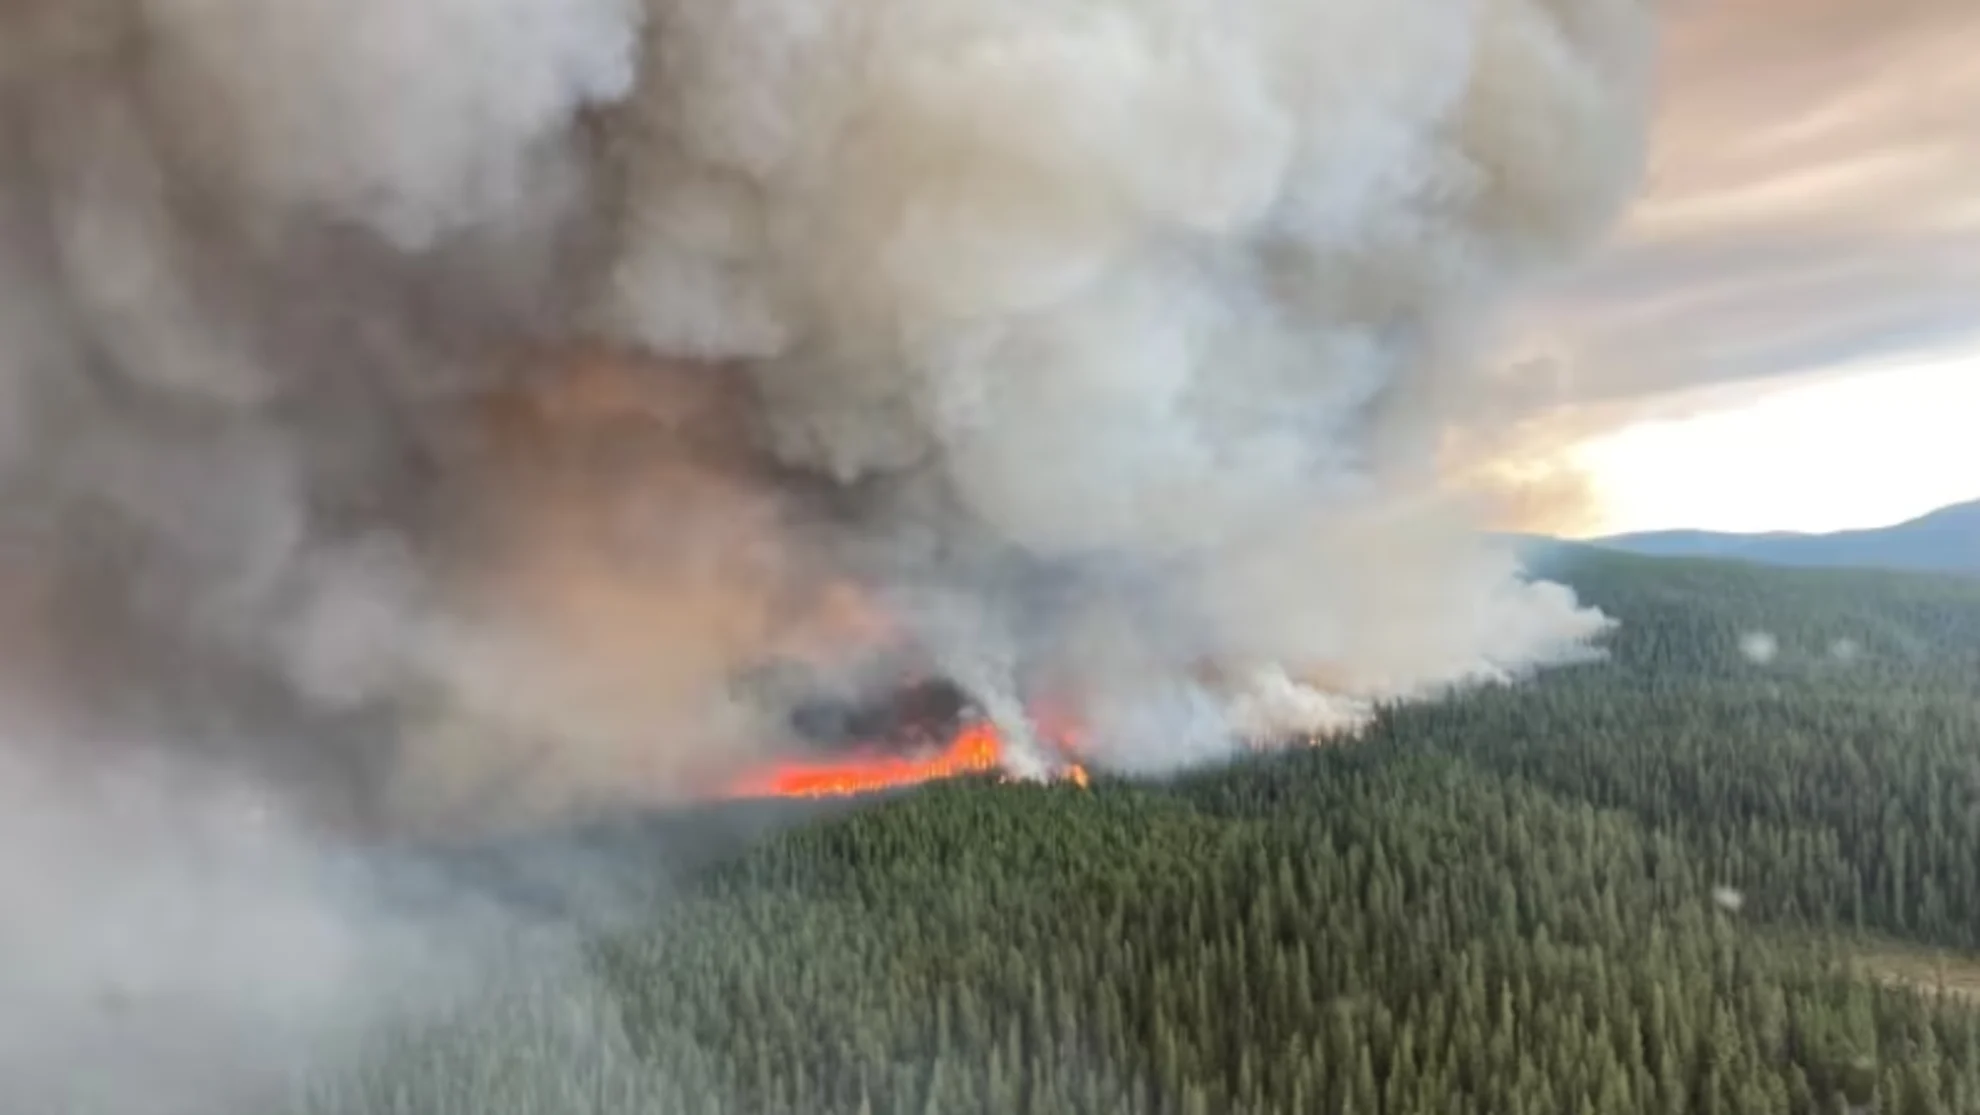 BC wildfire - July 10 - BC wildfire service - twitter